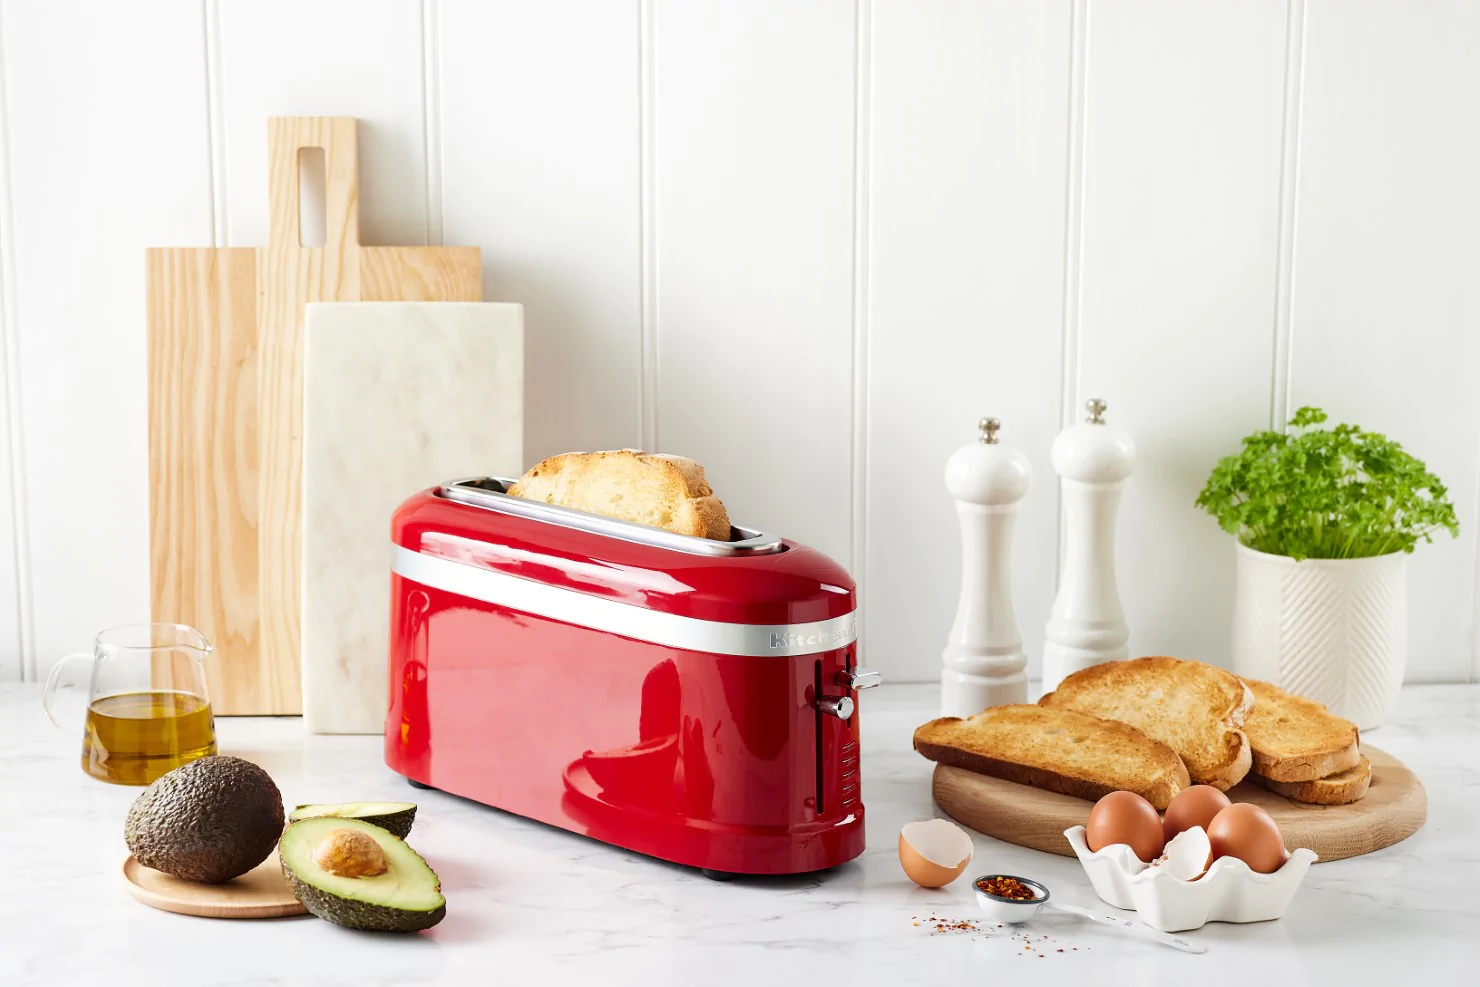 KitchenAid 4-Slice Empire Red Long Slot Toaster with High-Lift Lever